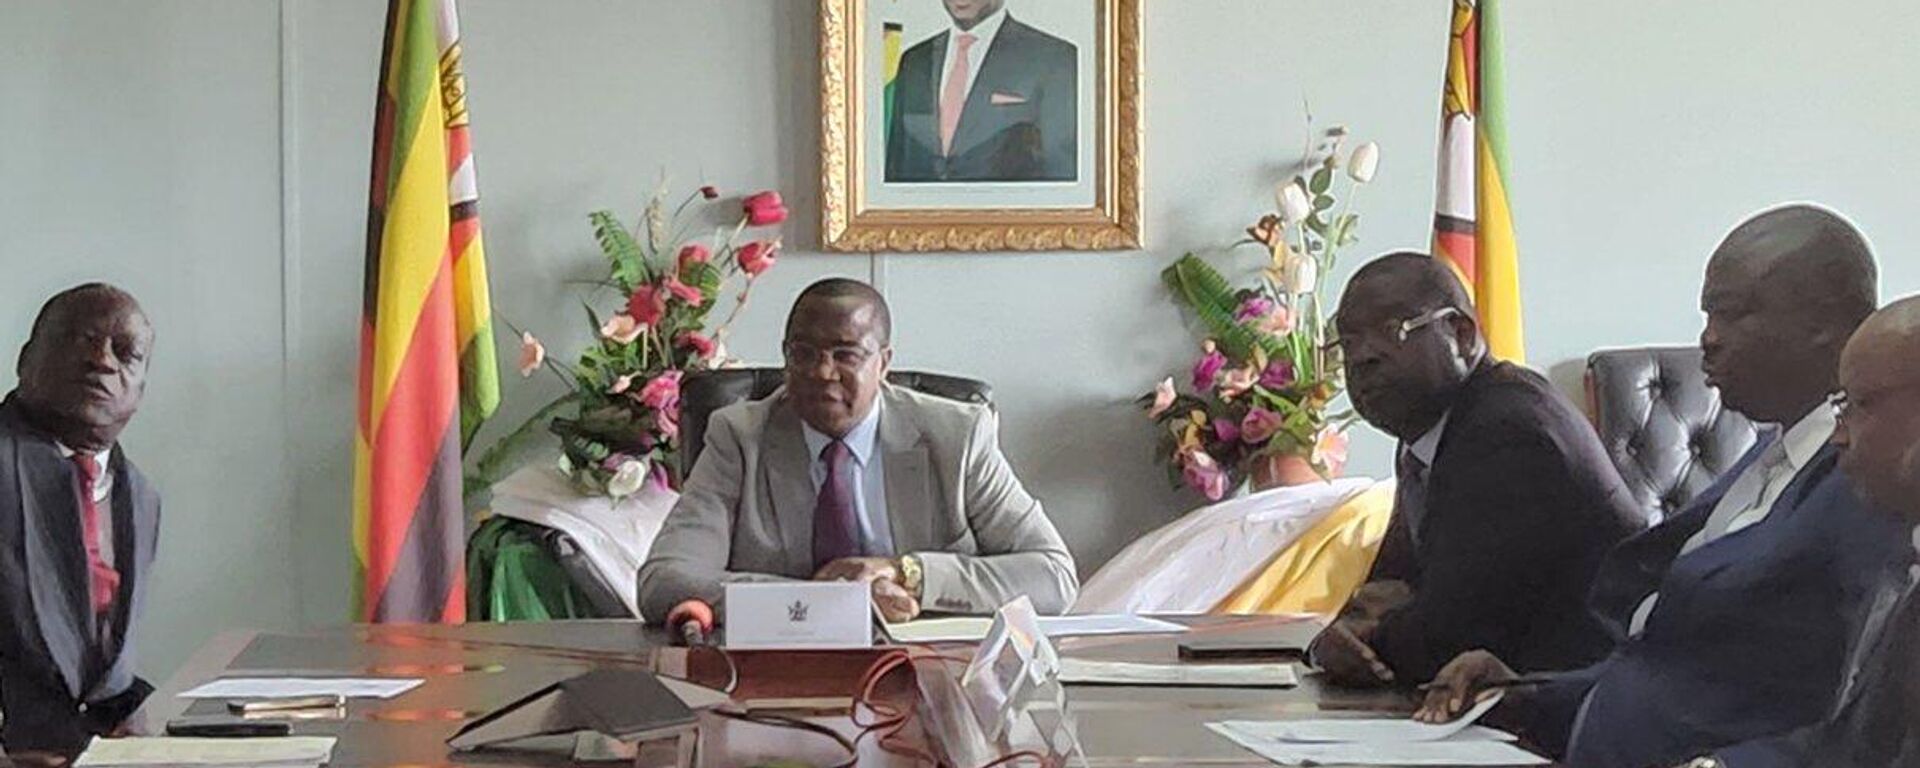 Minister of Finance and Economic Development of Zimbabwe Mthuli Ncube negotiating a loan with representatives of Standard Bank, ABSA, and Standard Bank Zimbabwe for the construction of five new 60-bed district hospitals and 30 new 20-bed health centers - Sputnik International, 1920, 30.03.2023